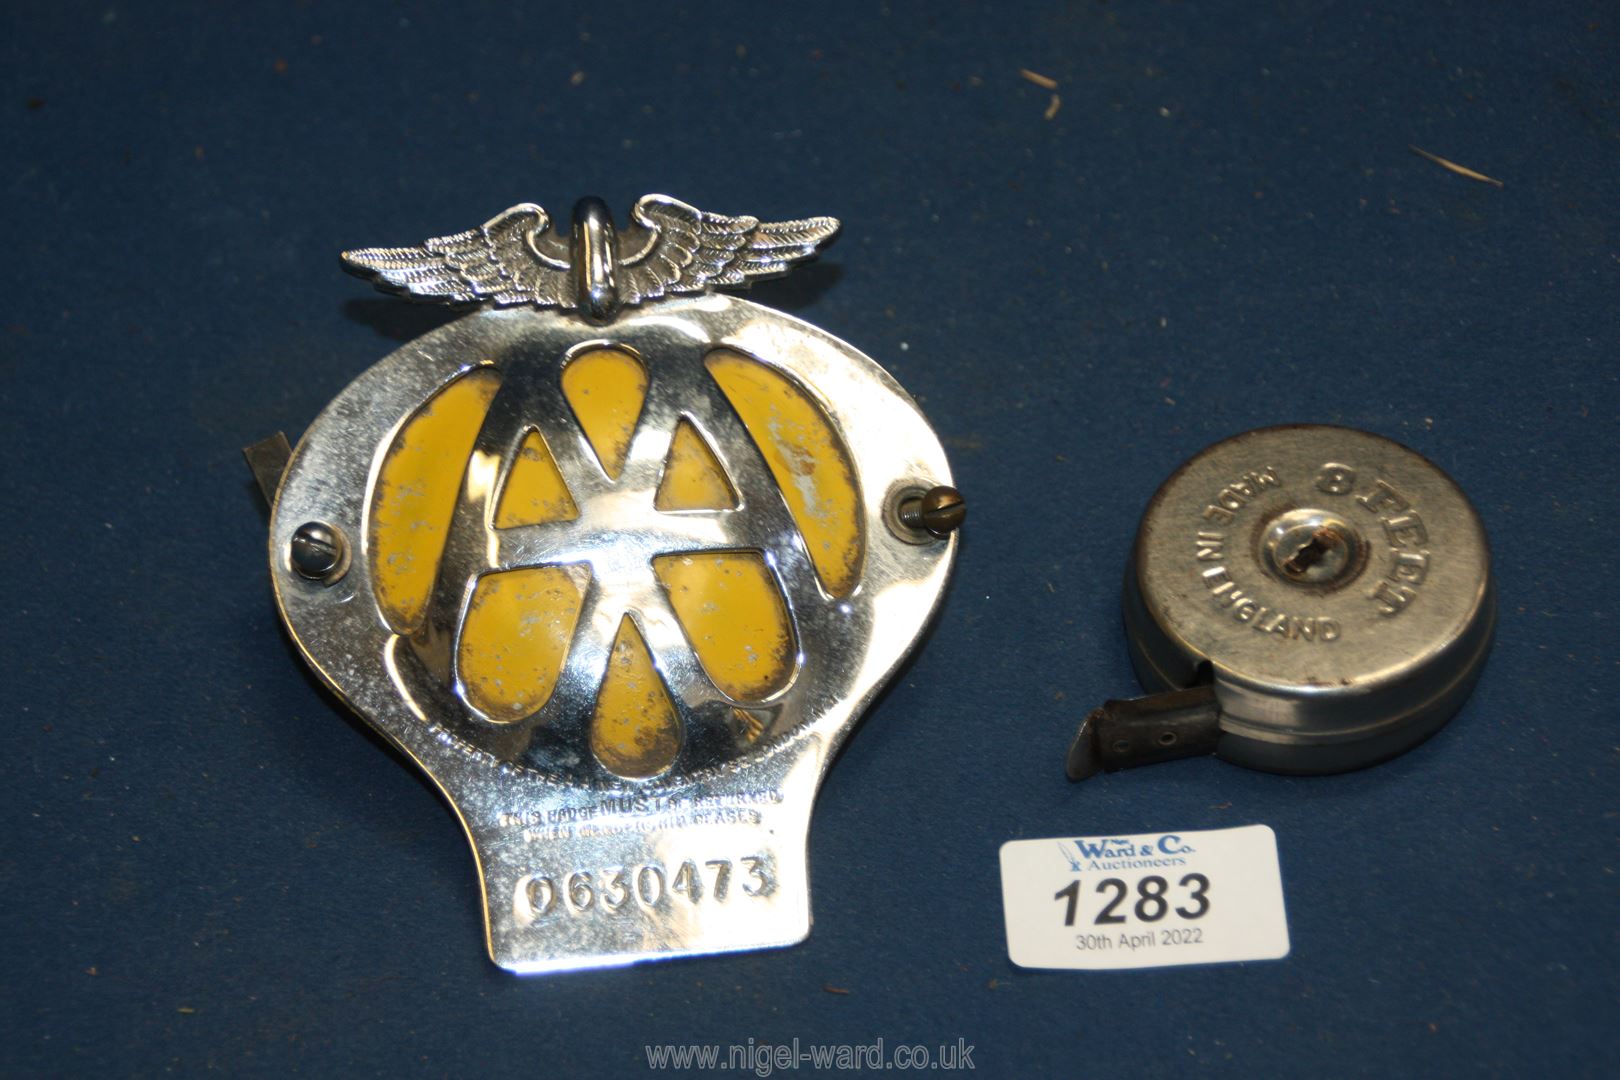 An A.A. Car badge, serial no .0630473 and an old A1 8ft metal tape measure.